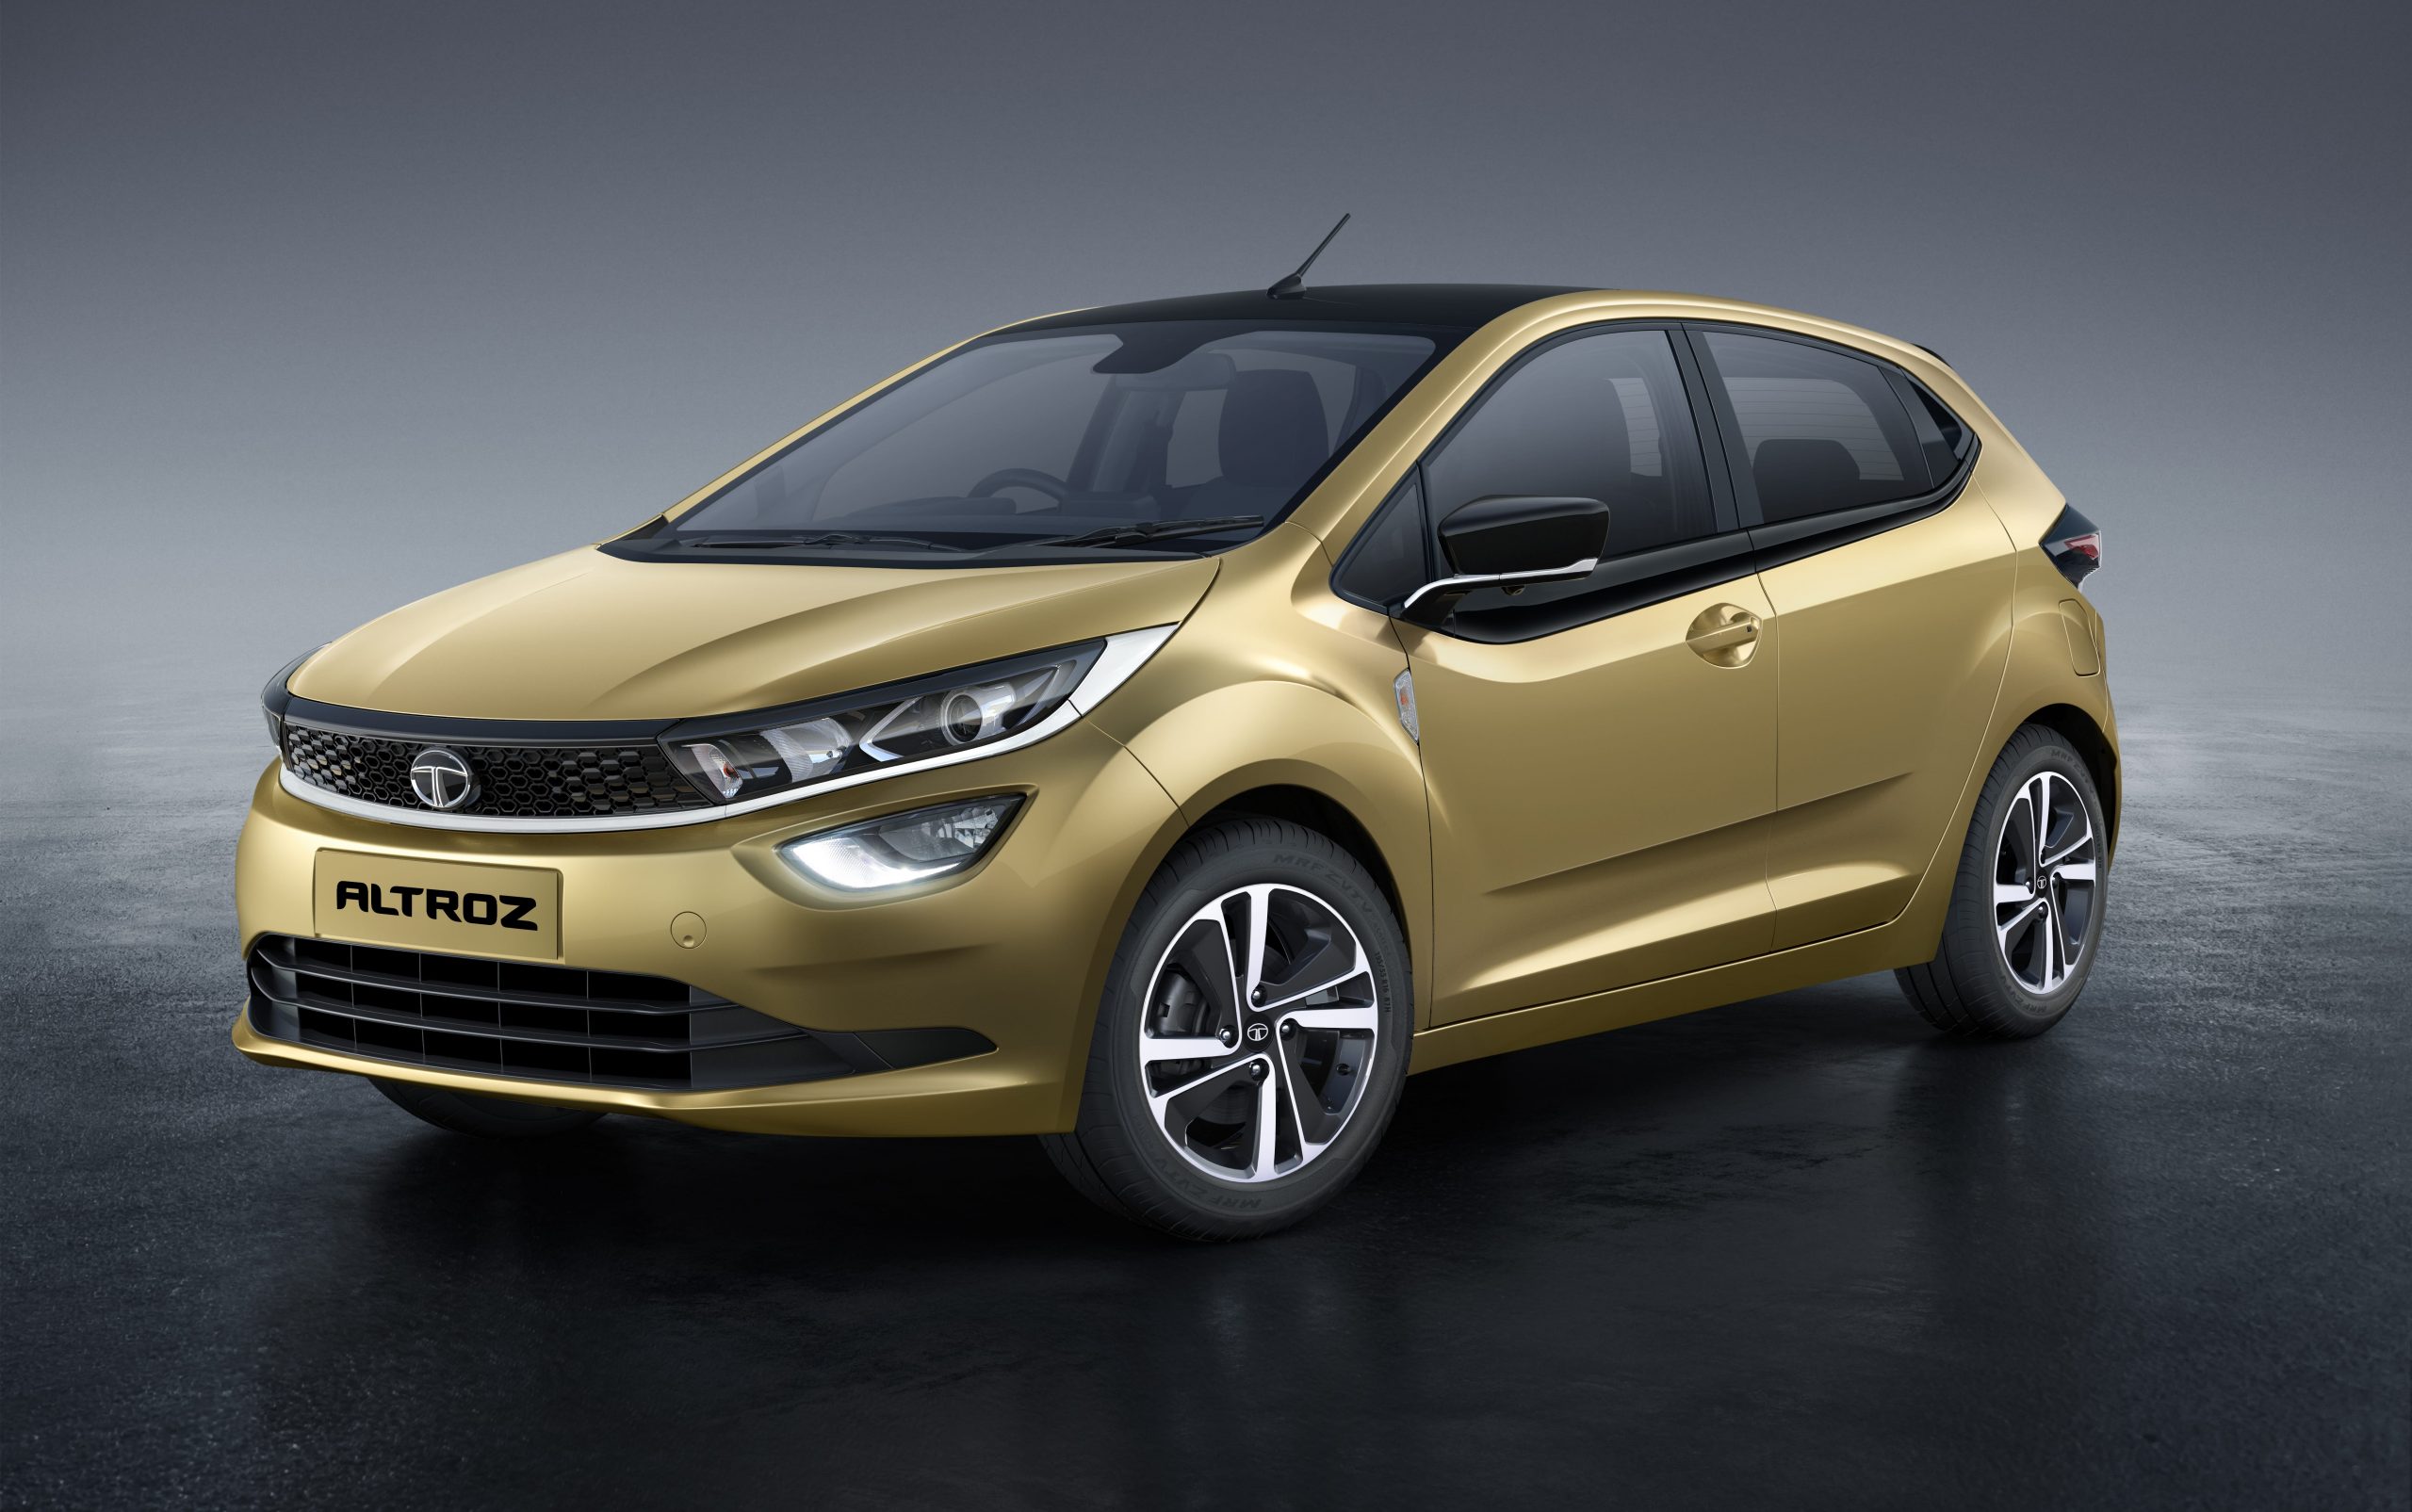 Tata Motors Sold 1,75,000 Units of Altroz Since Launch, More Variant To Be Launched Soon